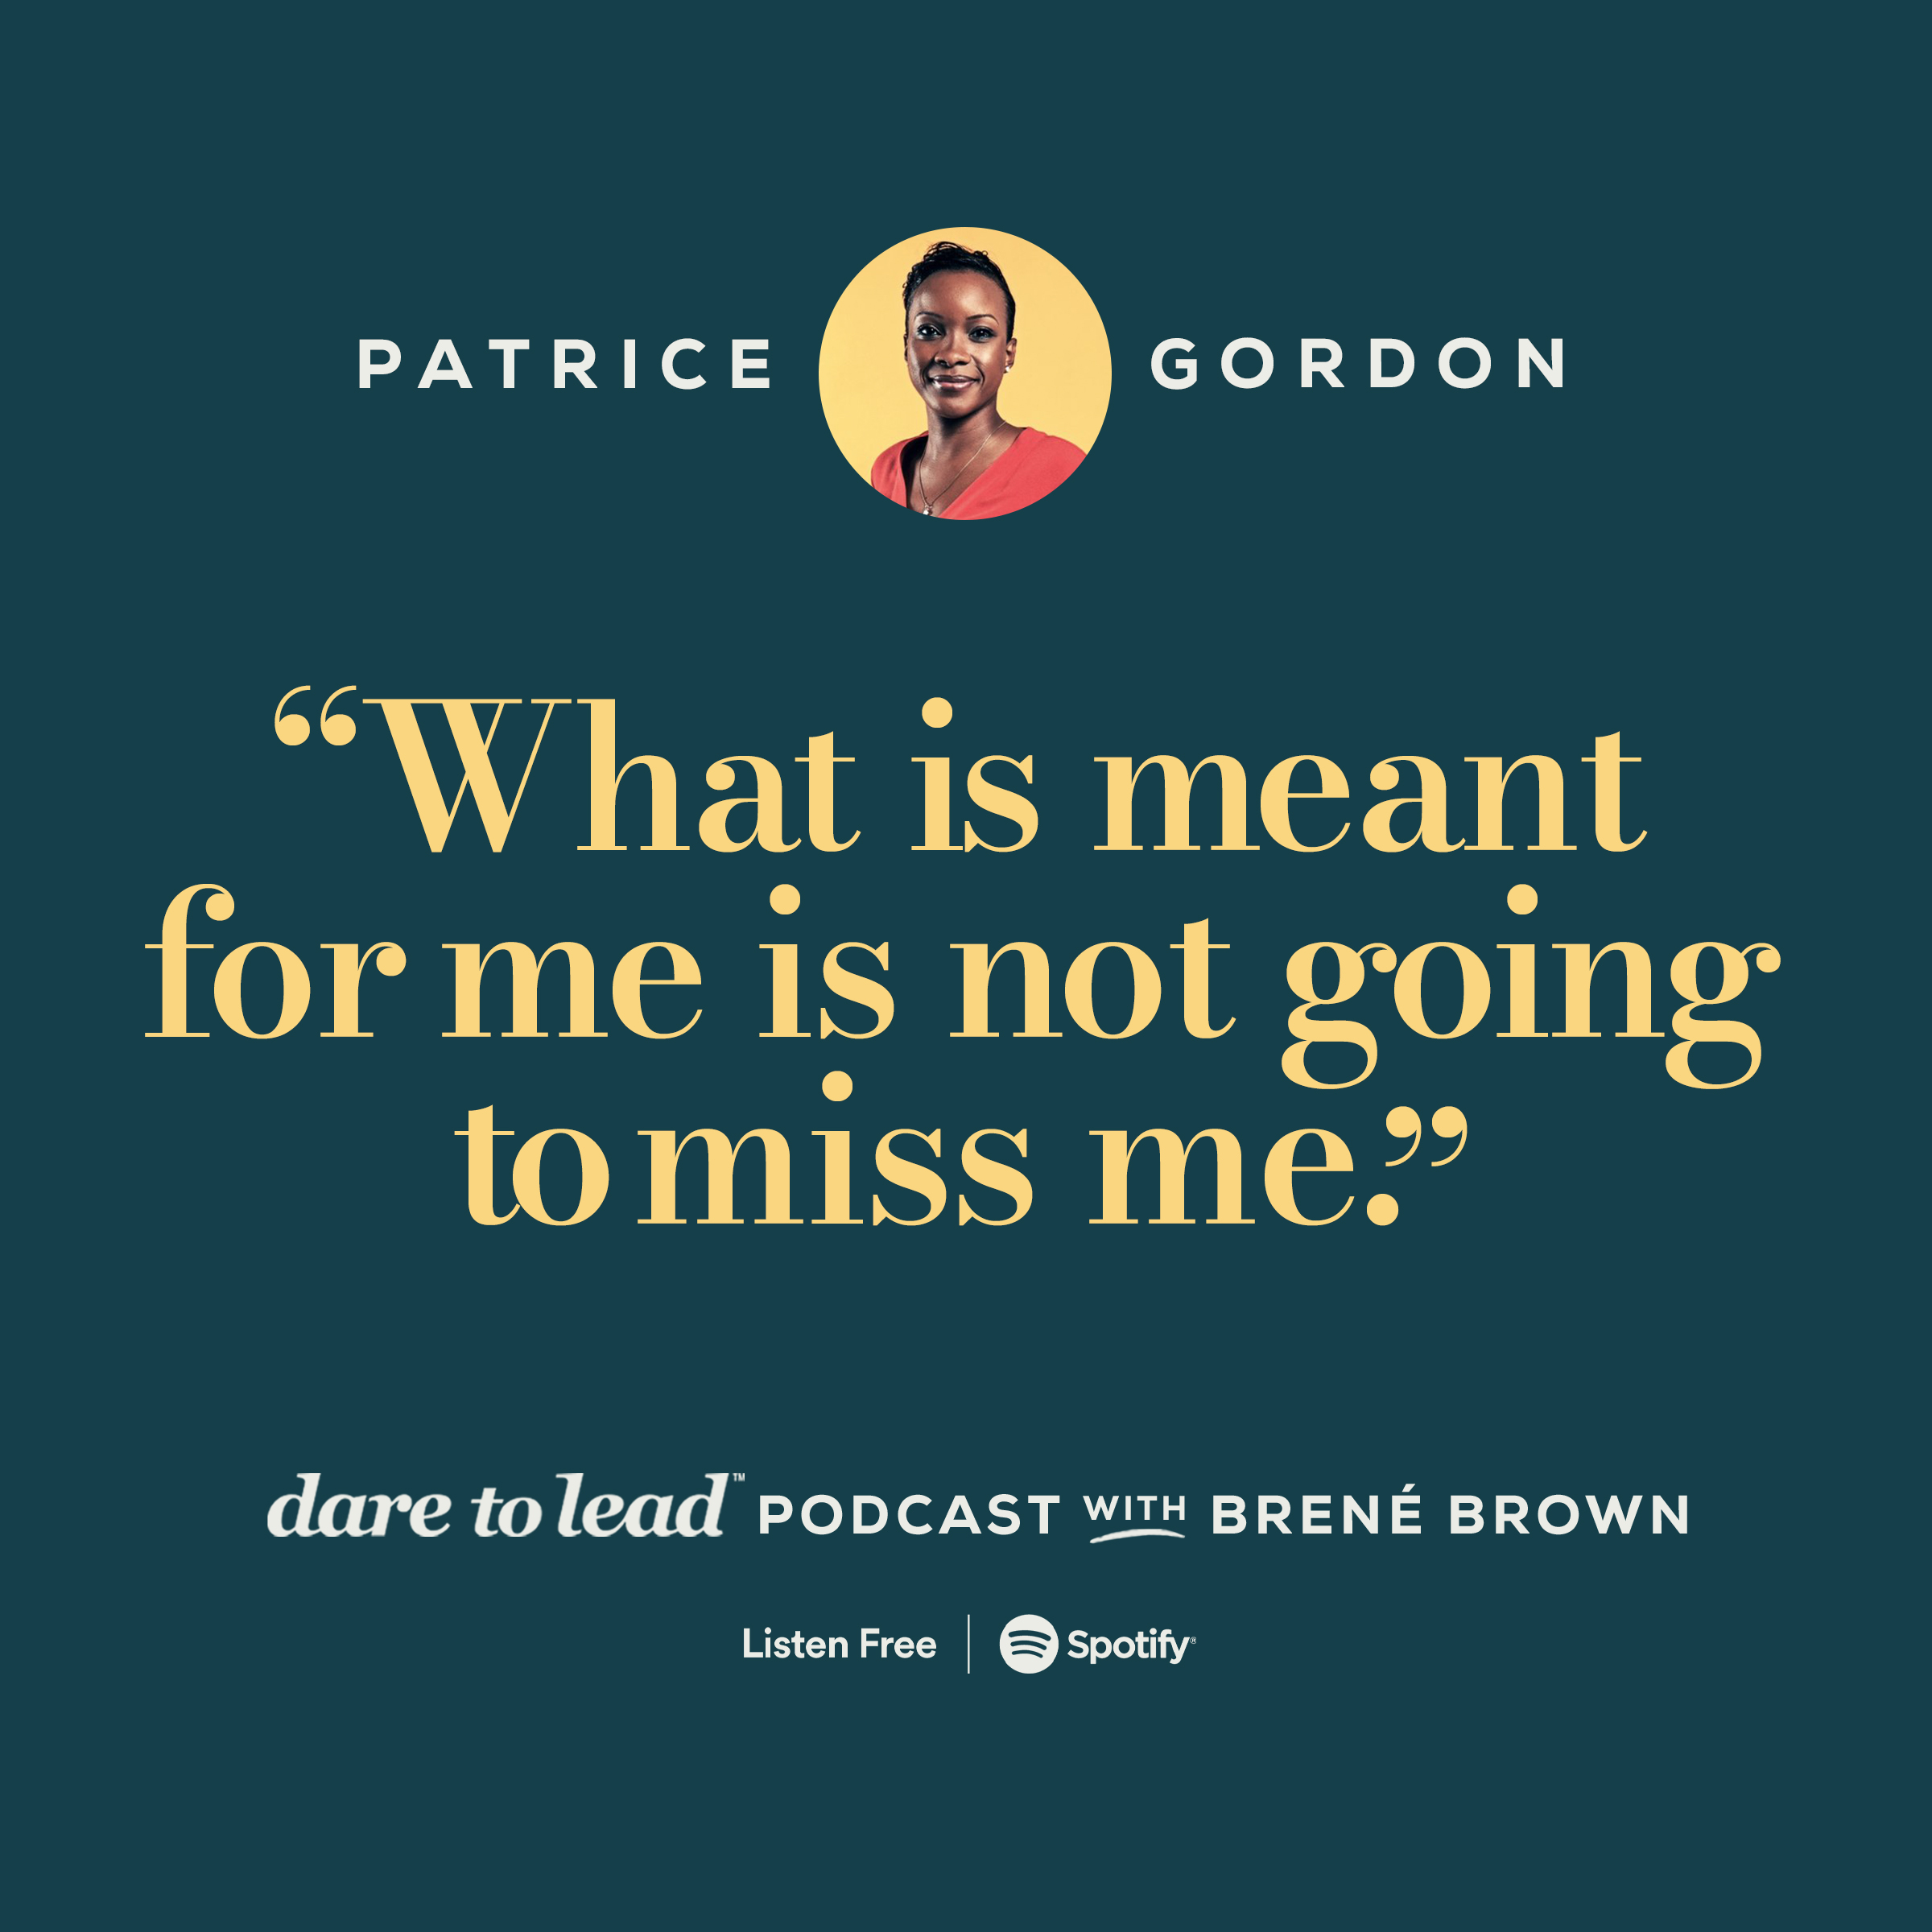 What is meant for me is not going to miss me. -by Patrice Gordon